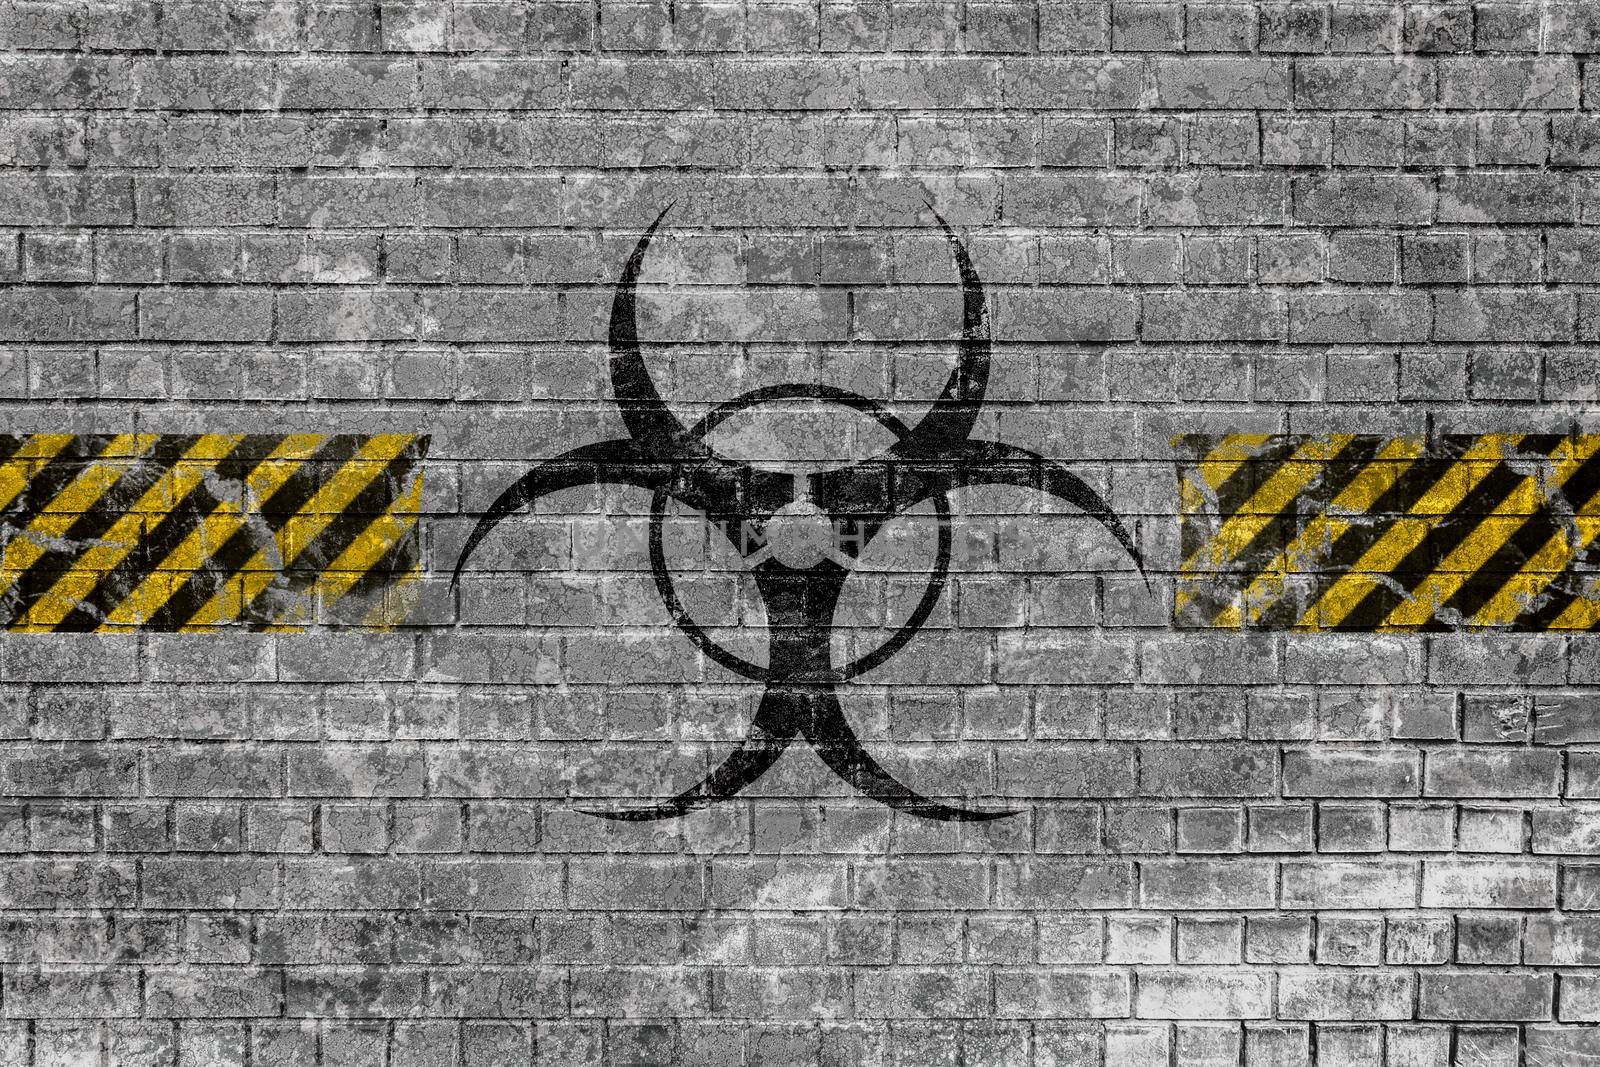 Faded biohazard sign with yellow-black lines on old brick wall with scratches and peeling paint